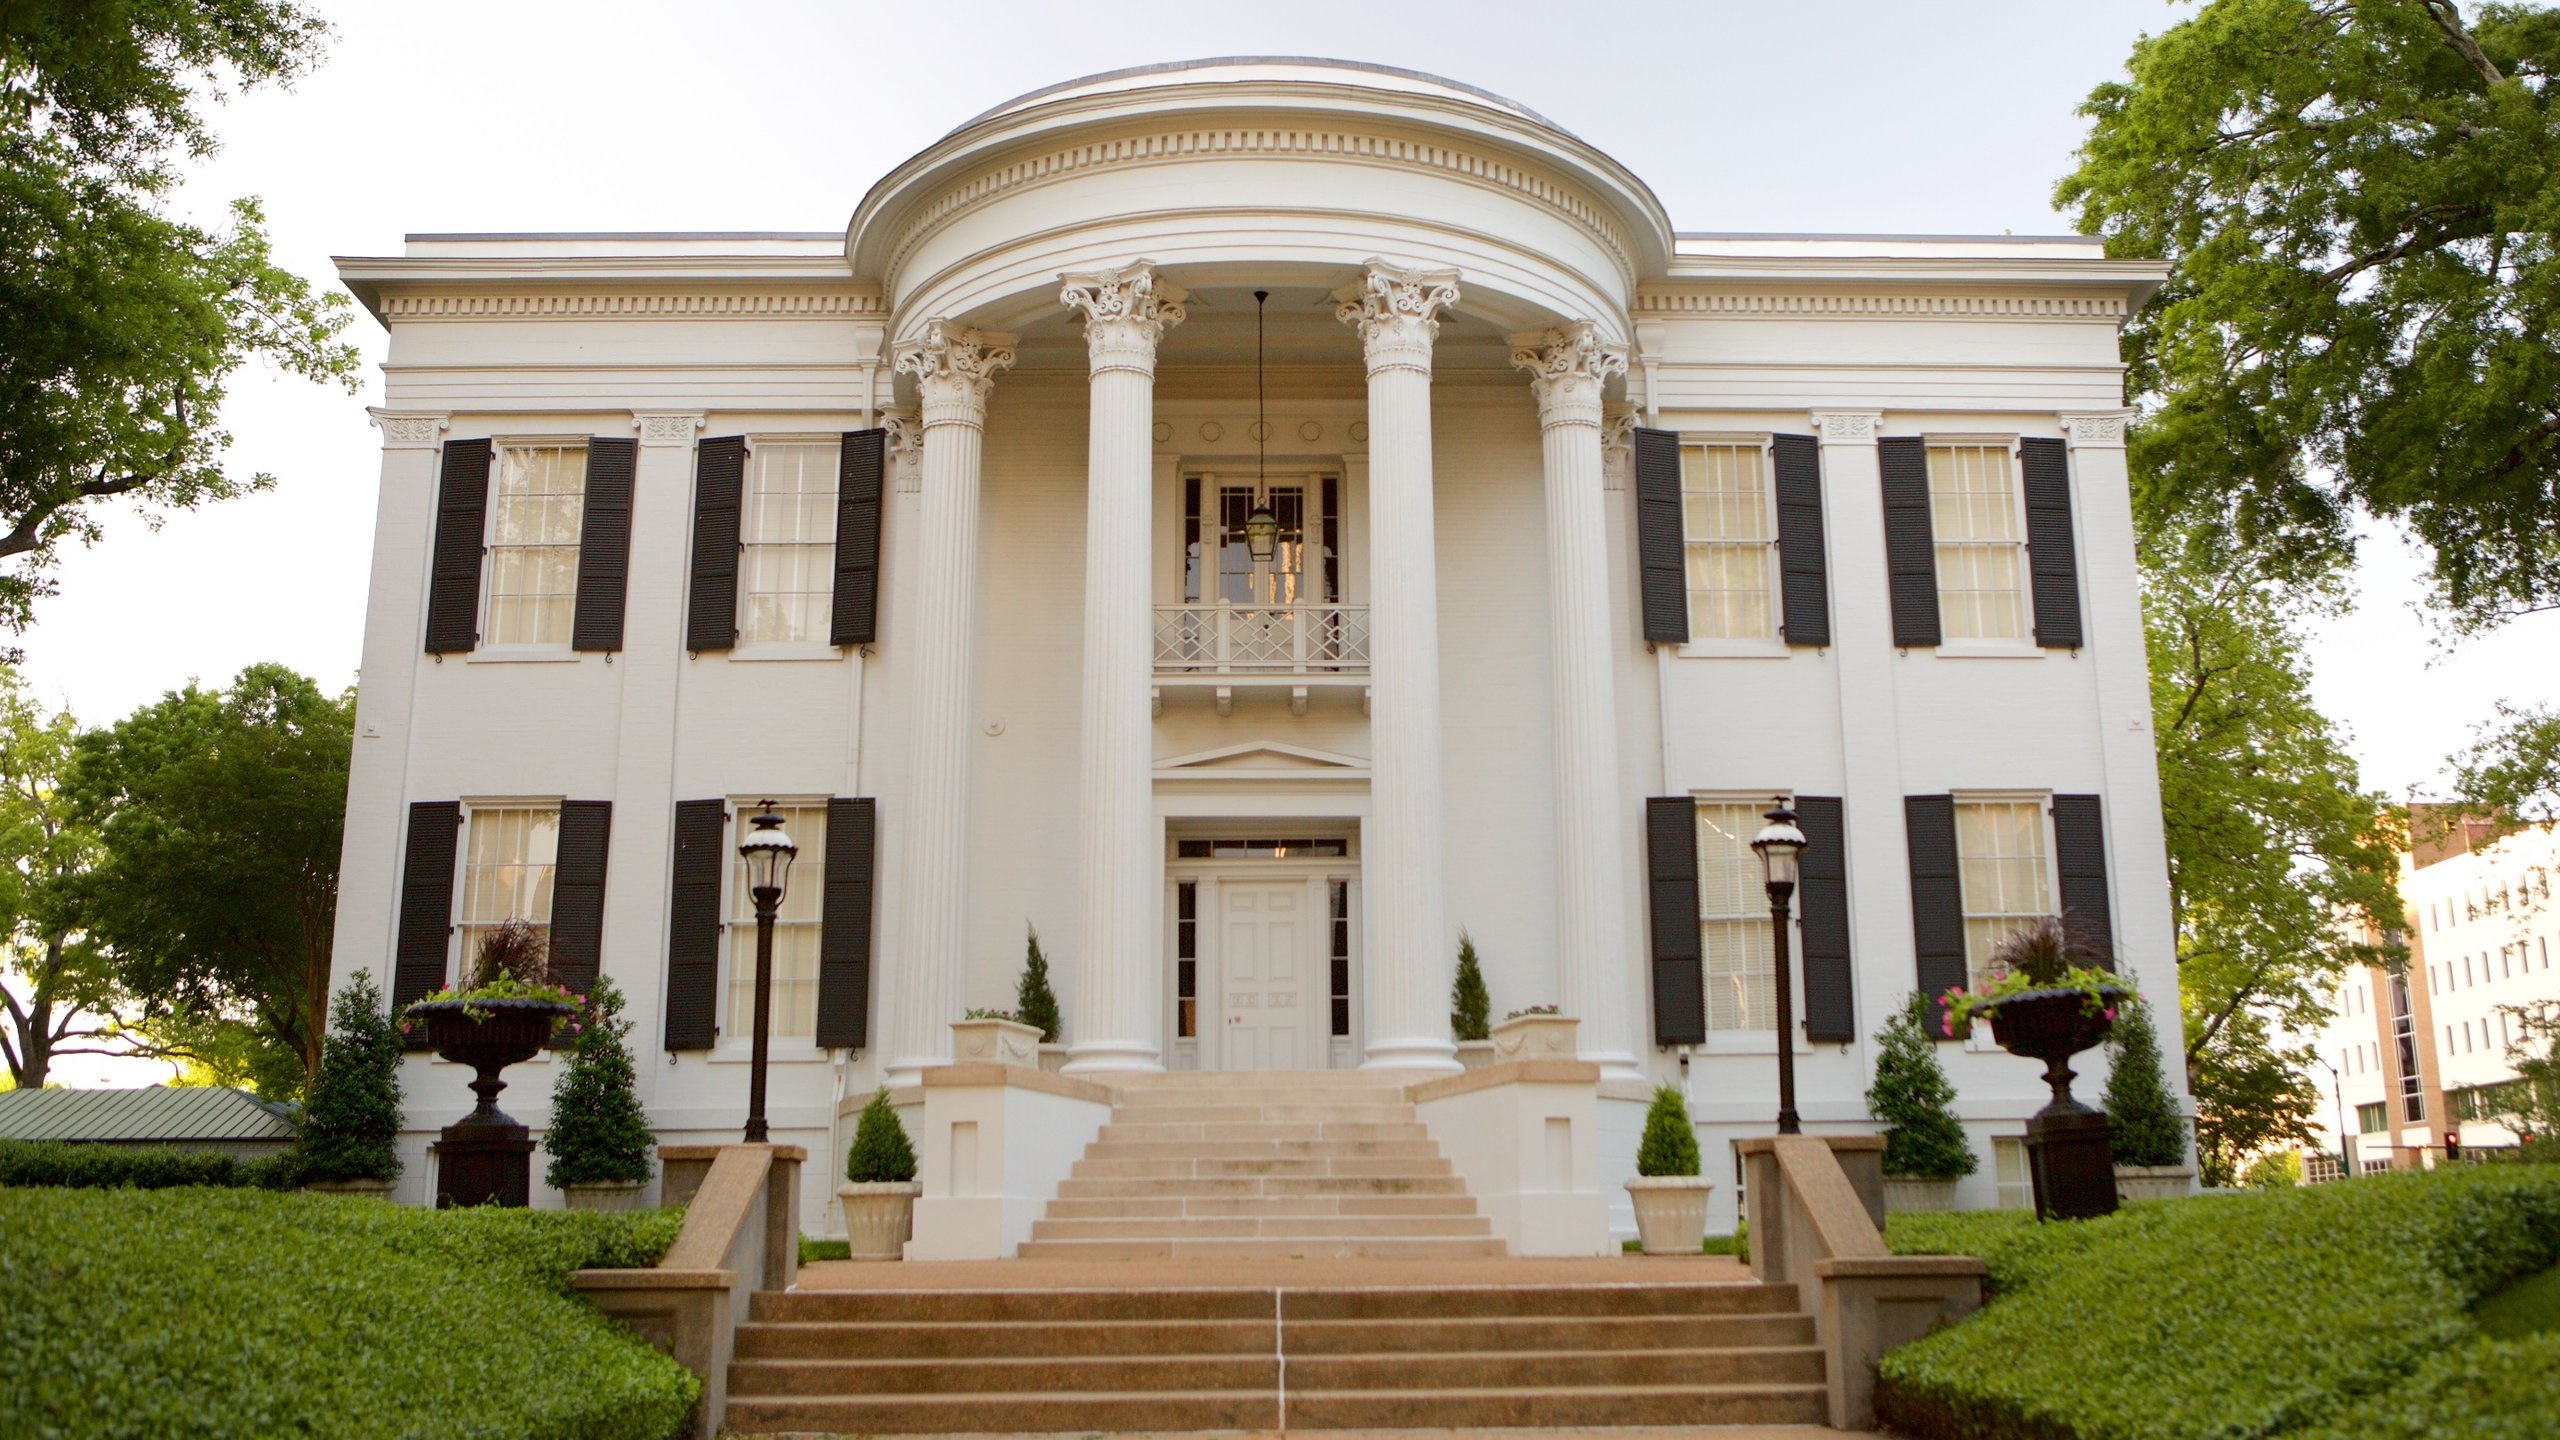 Jackson(Mississippi), Governors mansion, Vacation rentals and more, 2560x1440 HD Desktop